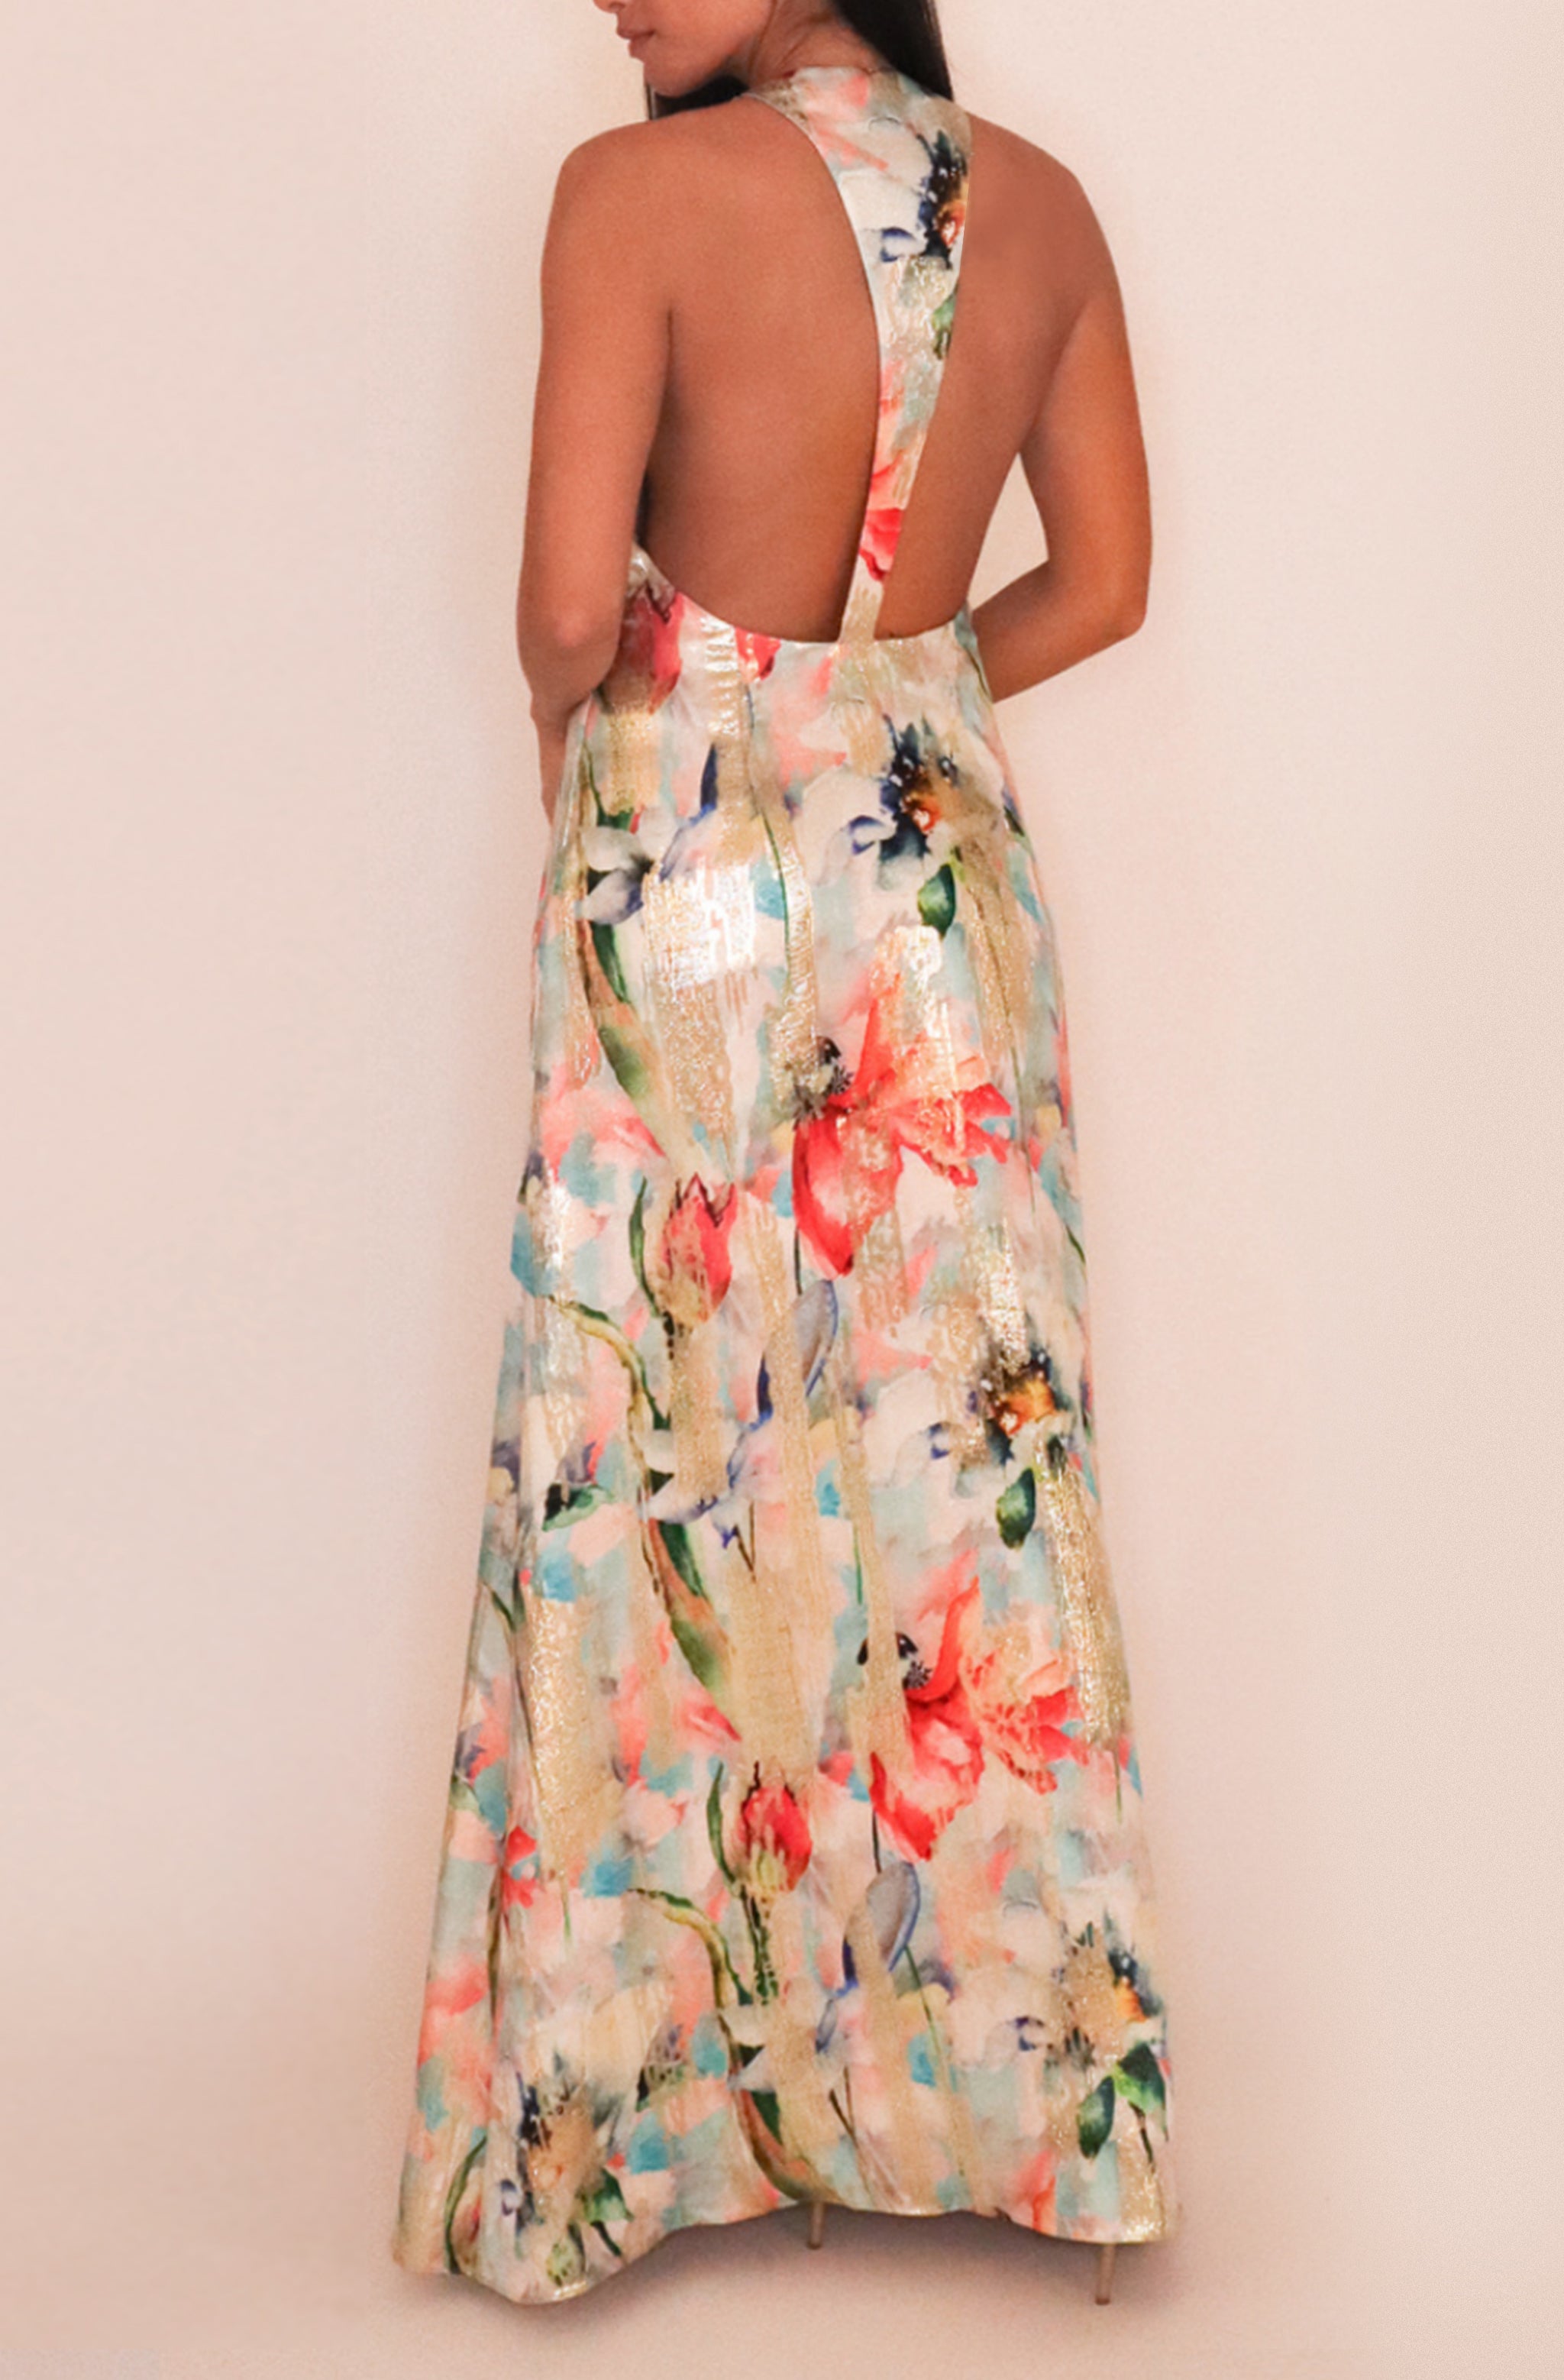 Printed Jacquard Gown